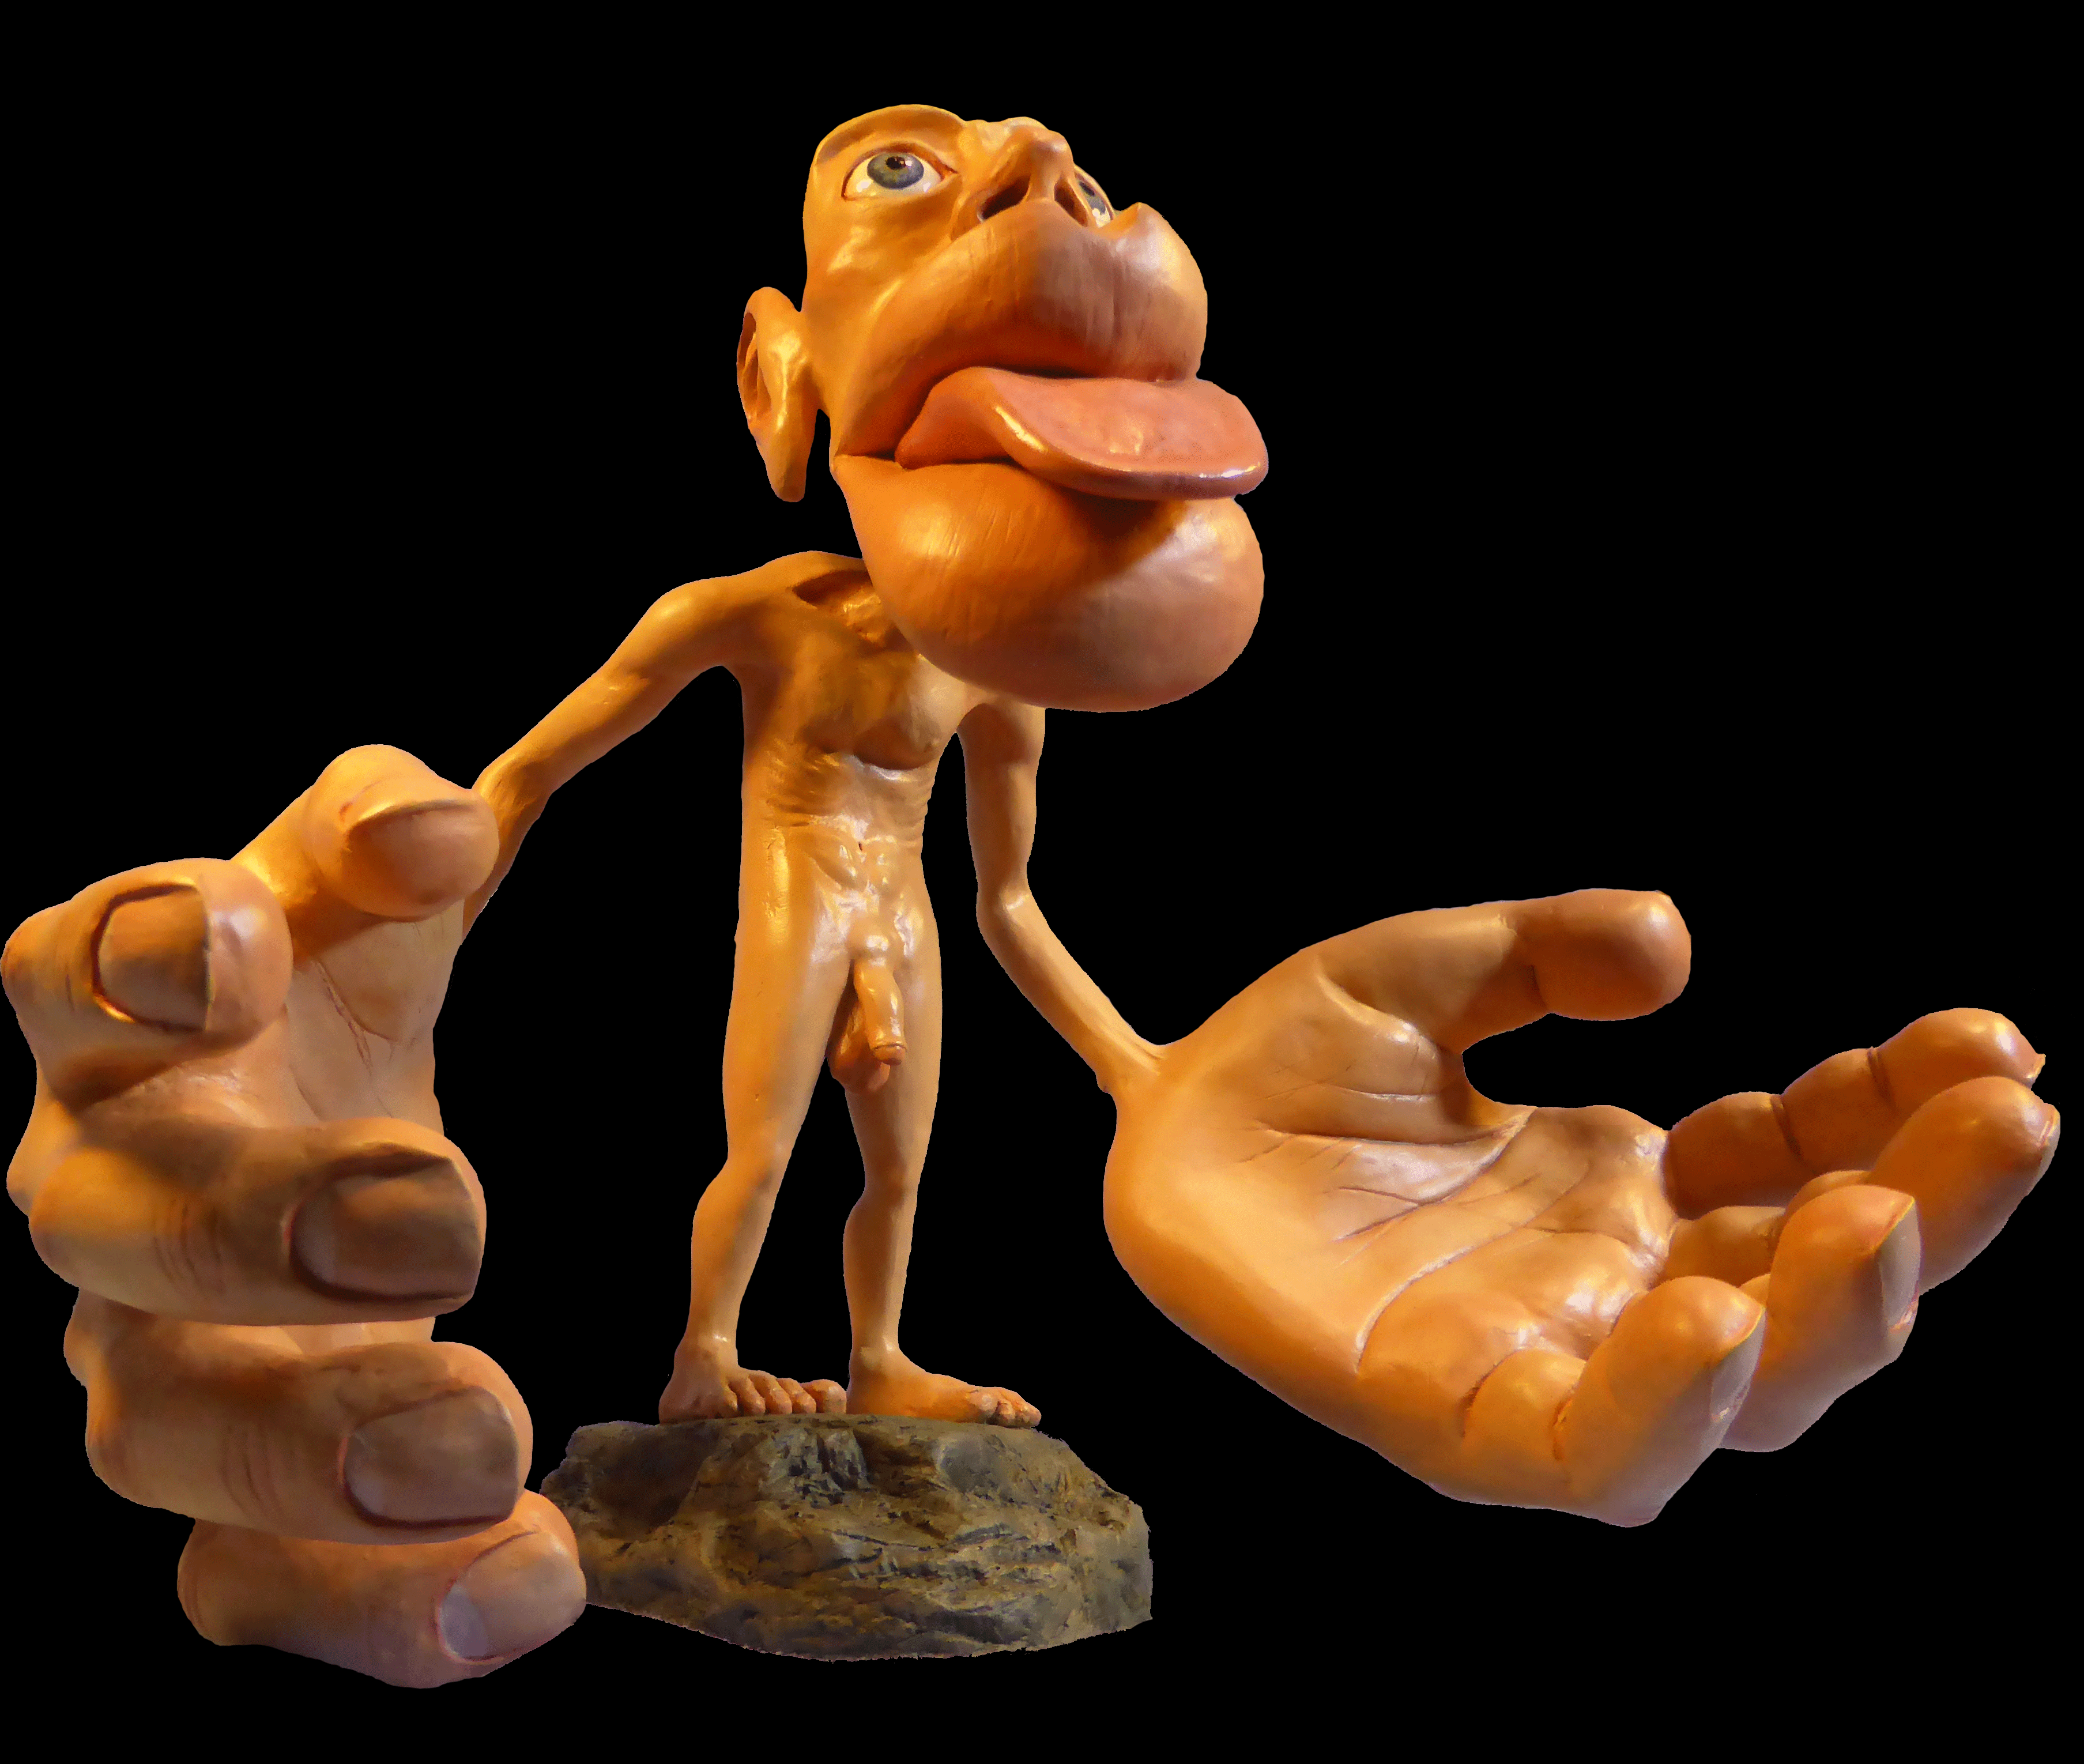 a model of the cortical homunculus demonstrating which parts of the body take precedence in the brain where the larger parts are more important than the smaller parts